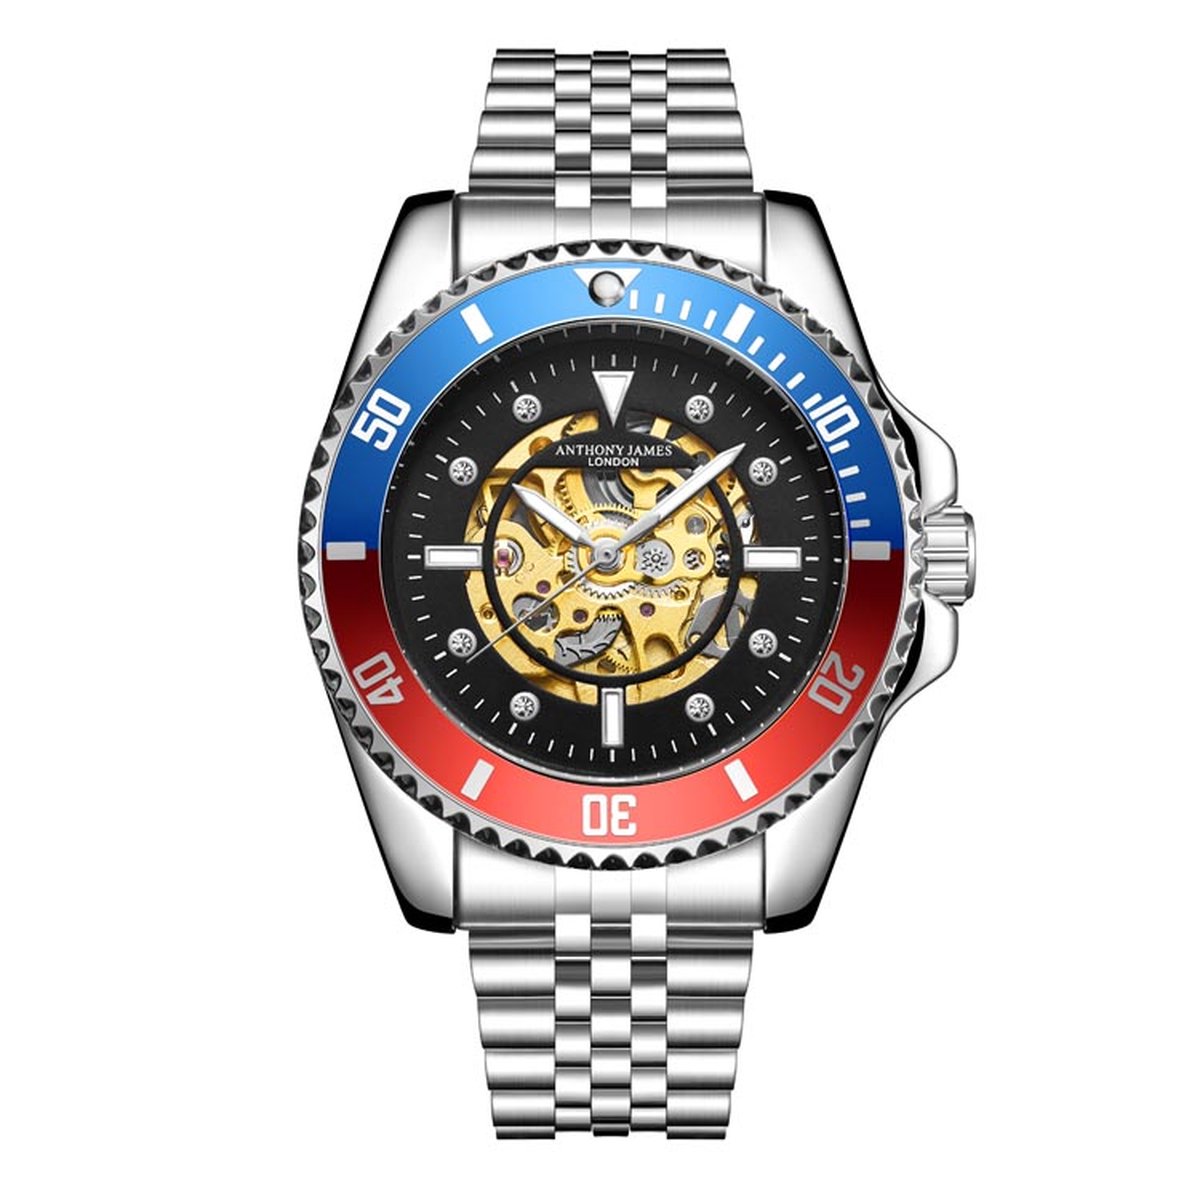 Anthony James Limited Edition Skeleton Sports Automatisch Staal - Herenhorloge